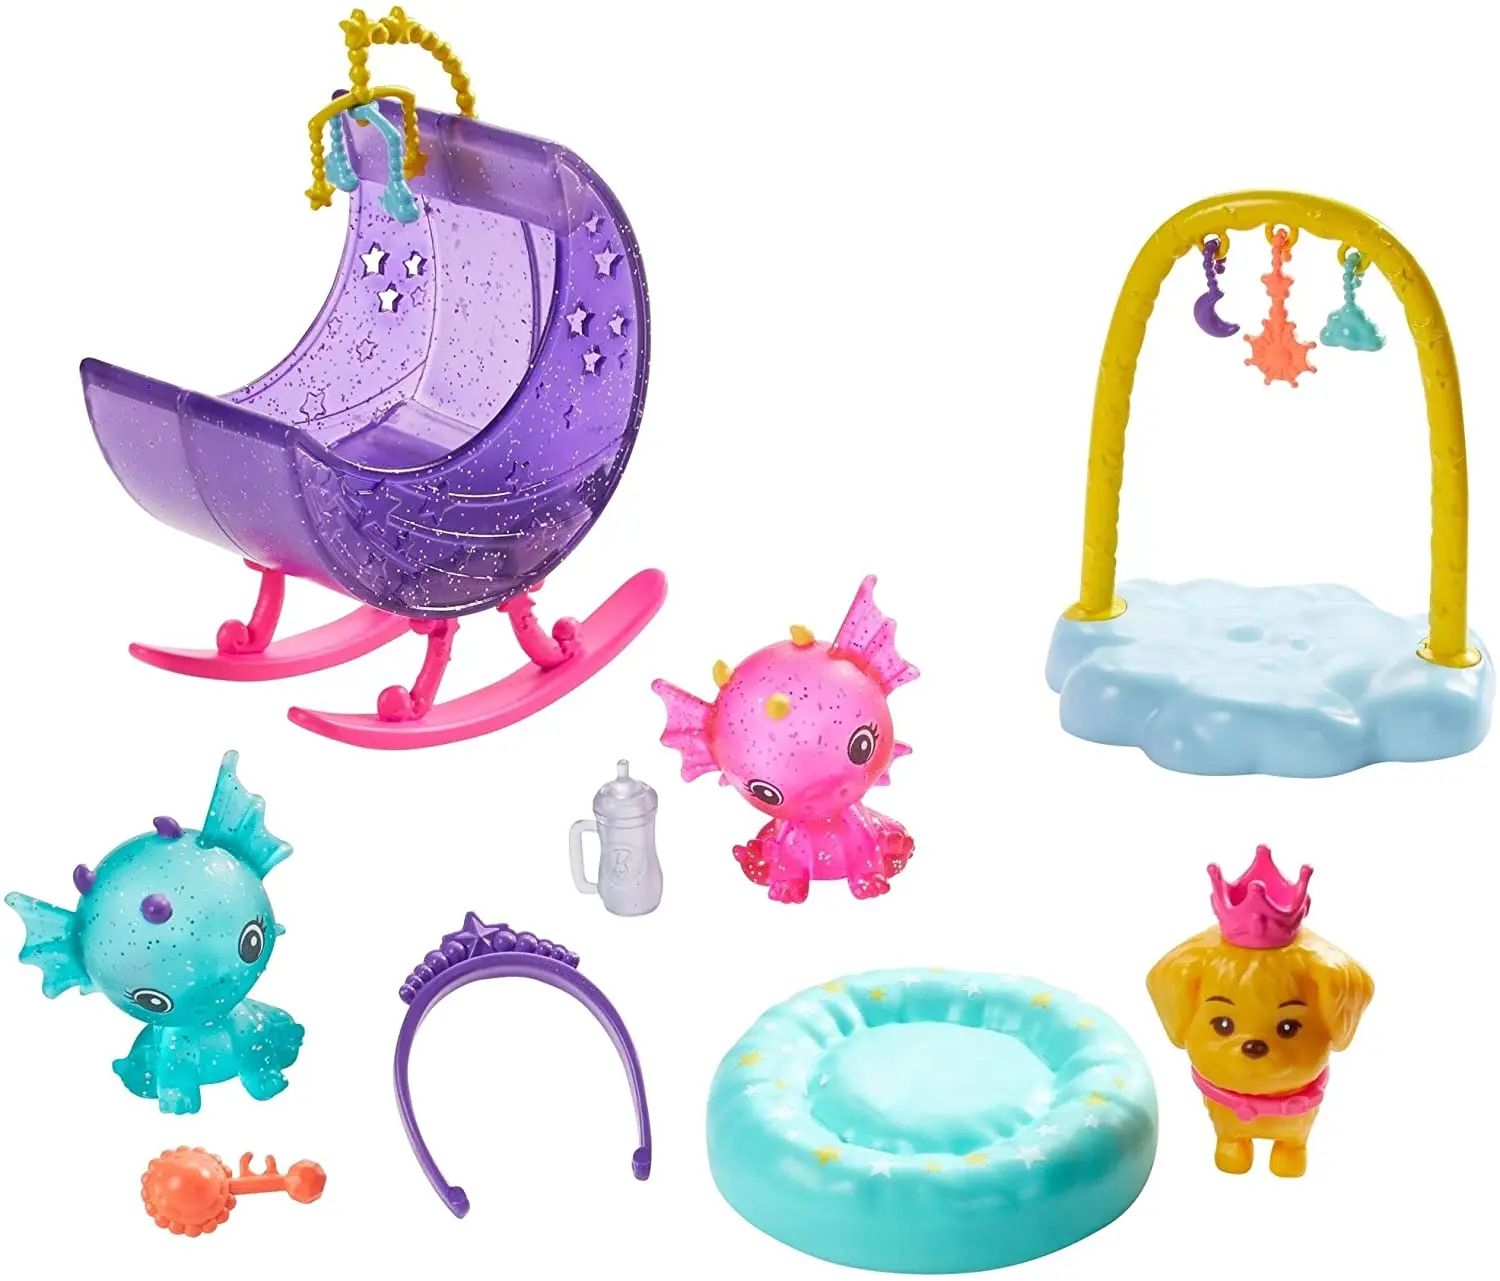 ​Barbie Dreamtopia, Nursery, Playset with Princess Doll, Baby Dragons, Cradle and Accessories, Multi, for Girls, Best Gift